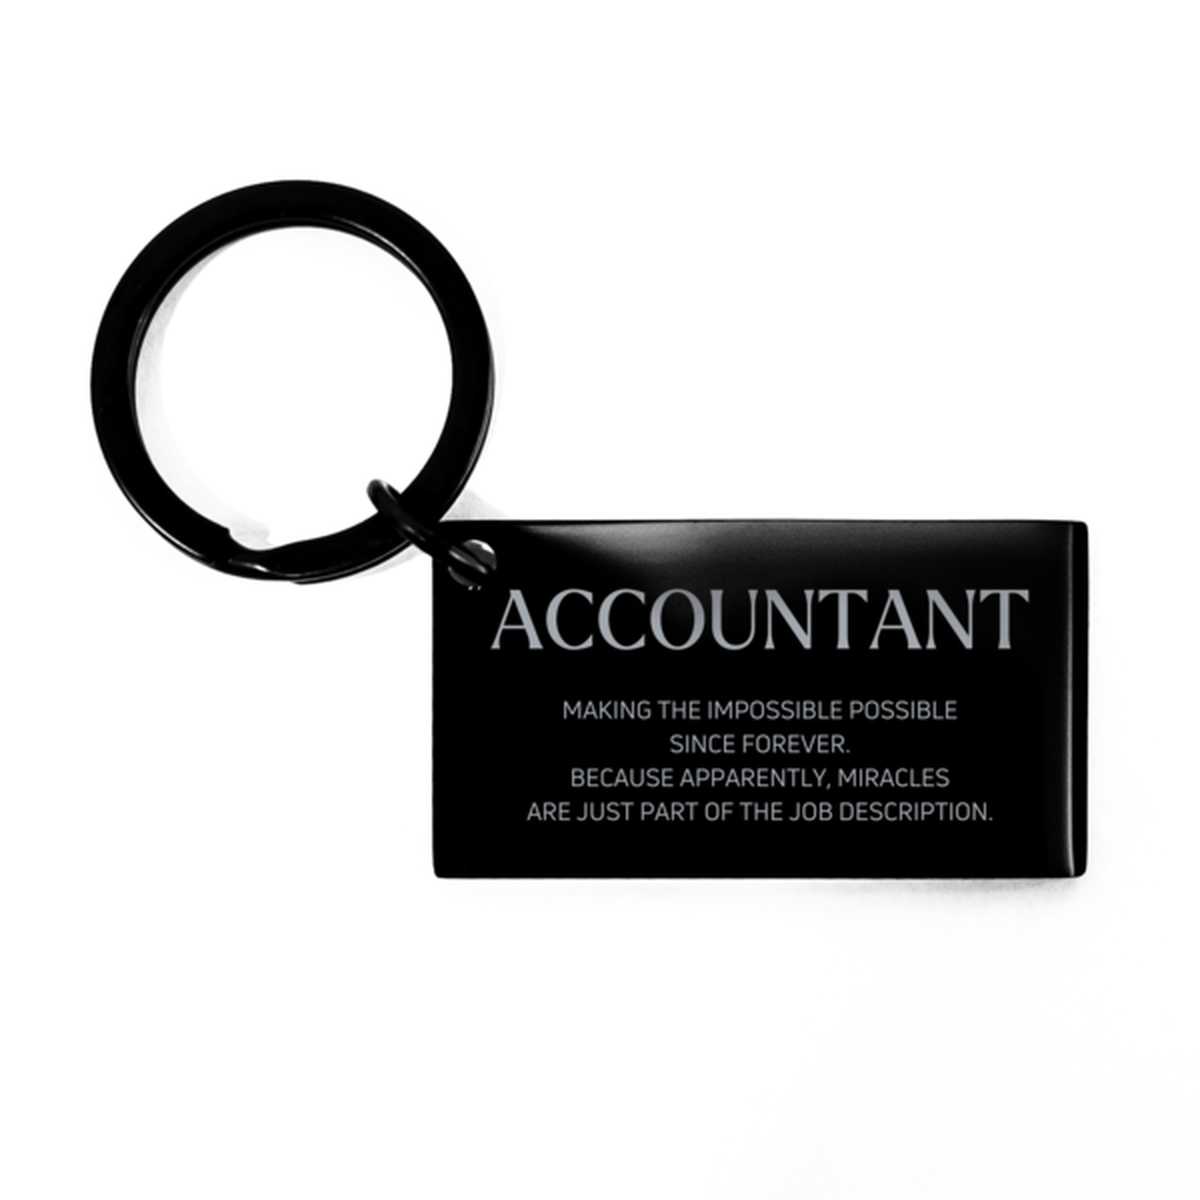 Funny Accountant Gifts, Miracles are just part of the job description, Inspirational Birthday Keychain For Accountant, Men, Women, Coworkers, Friends, Boss